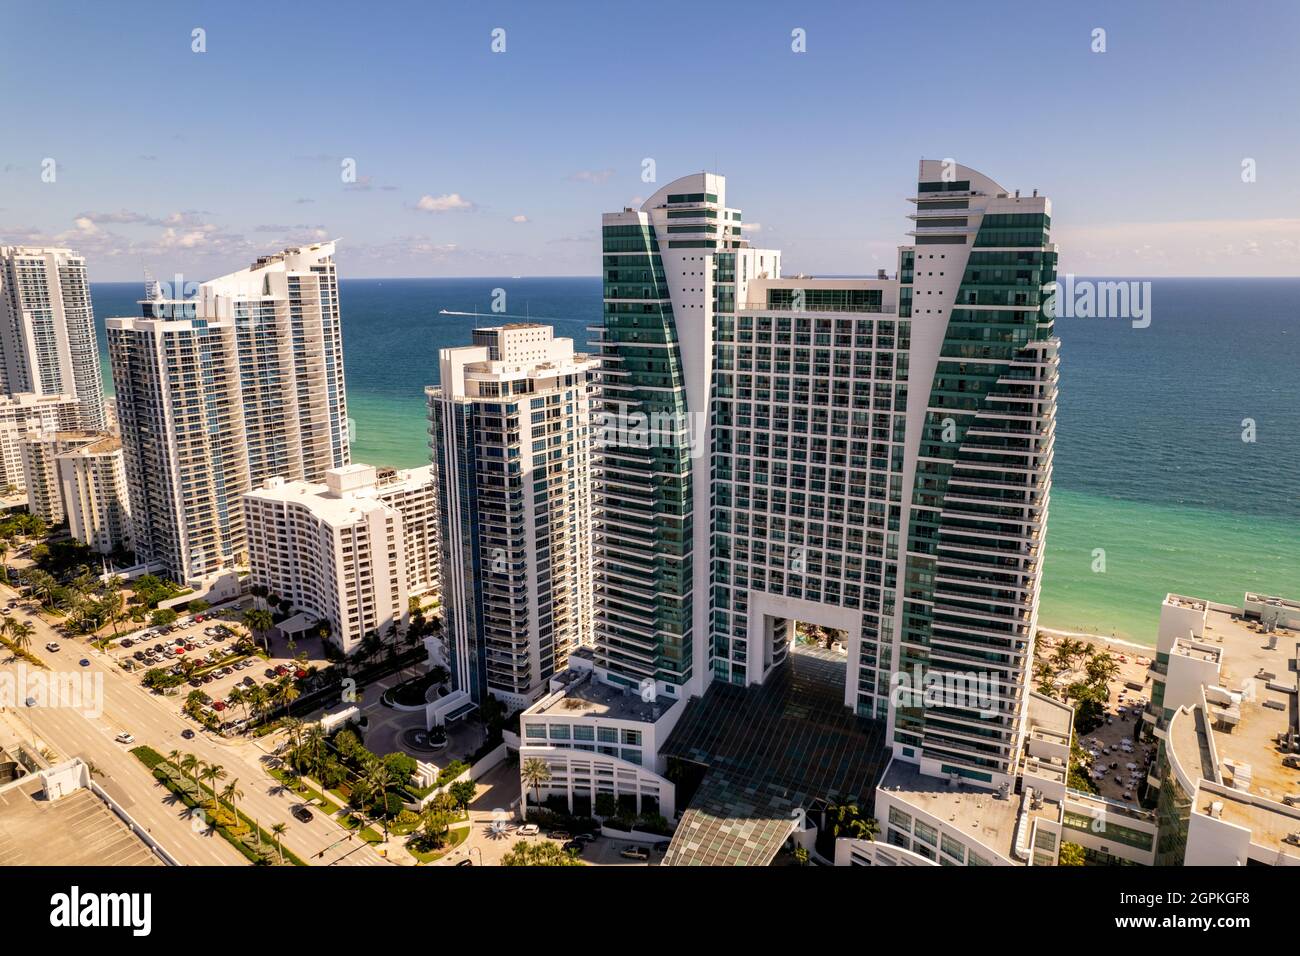 Hollywood, FL, USA - September 26, 2021: Aerial drone photo of The Diplomat on Hollywood Beach FL Stock Photo